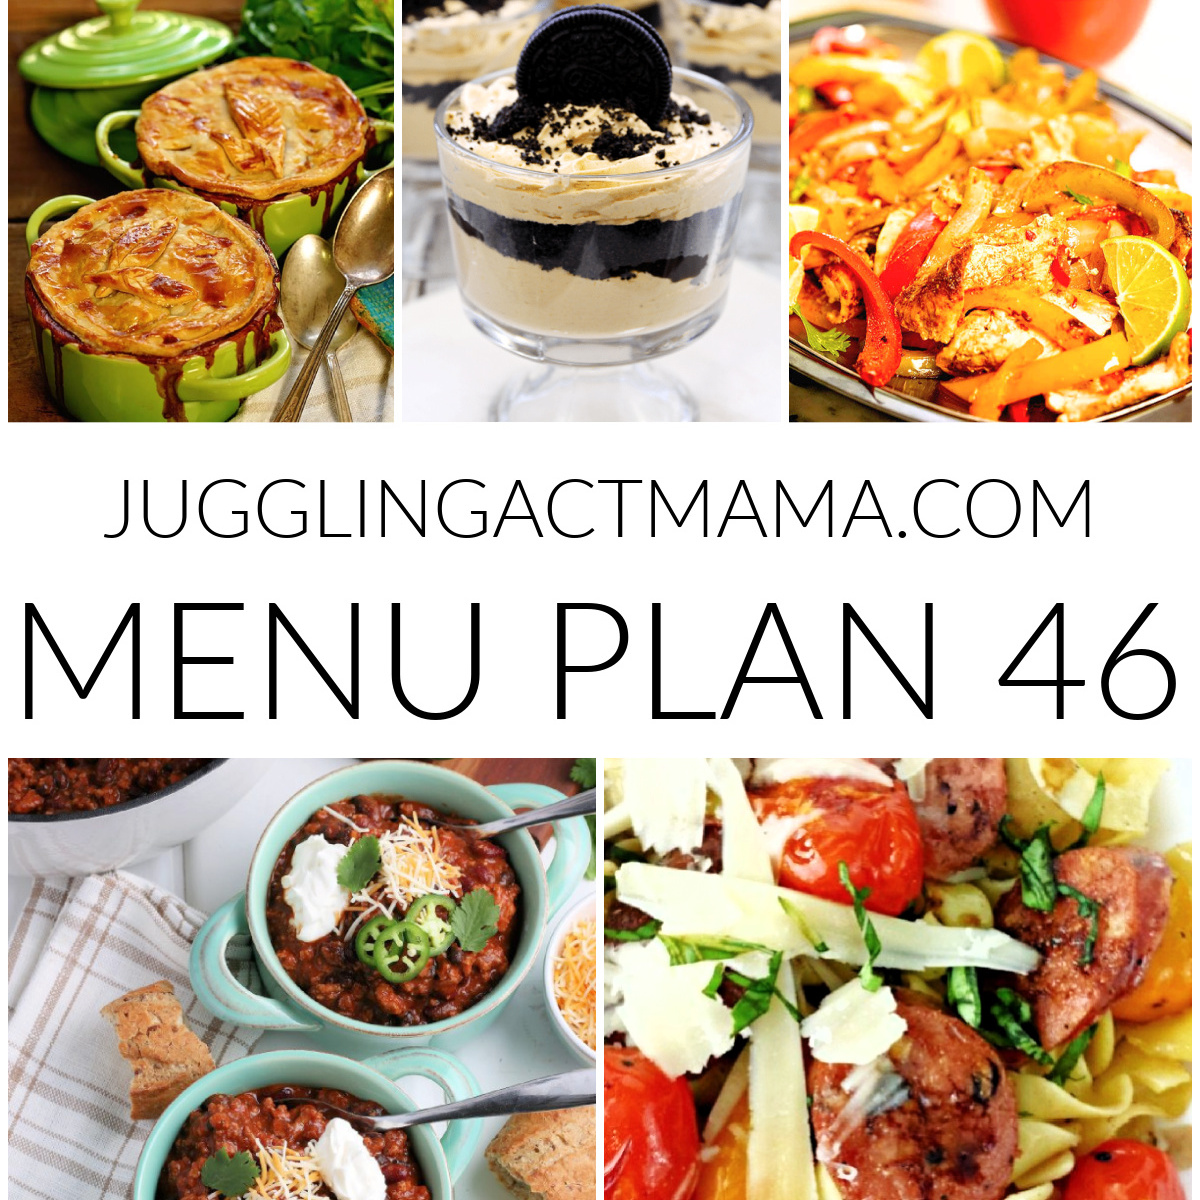 Meal Plan 46 collage image with text overlay.